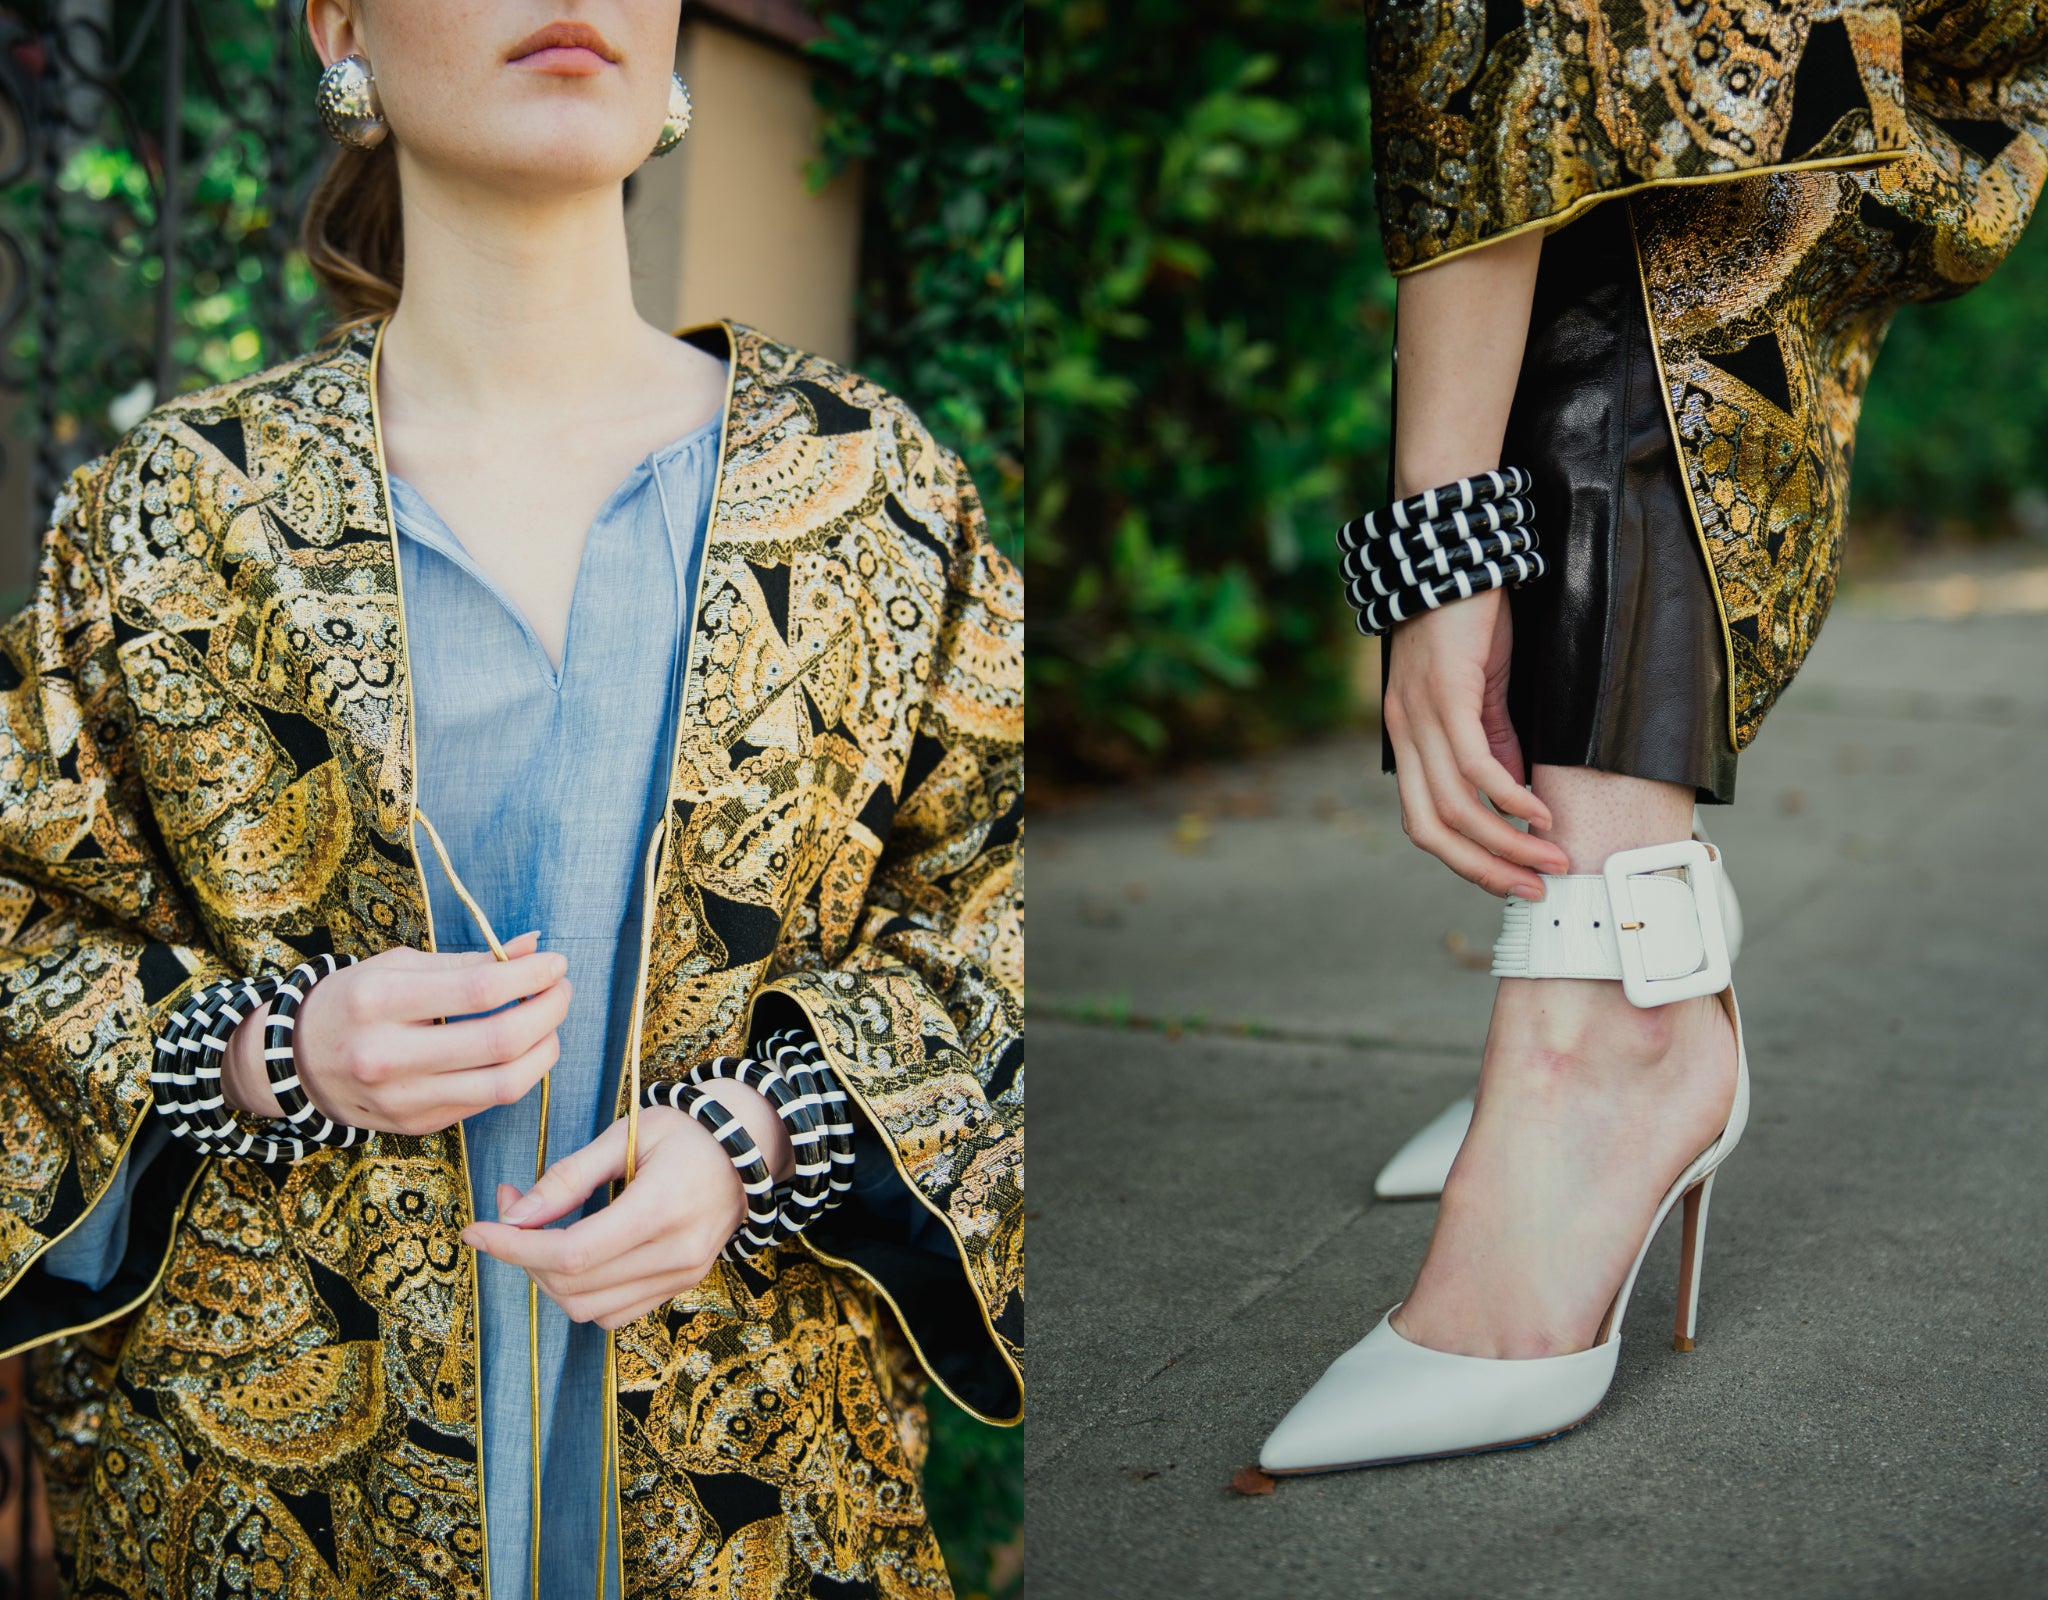 Girl in gold brocade Anthony Muto Cocoon coat leather pants & white heel front of gated shrubs